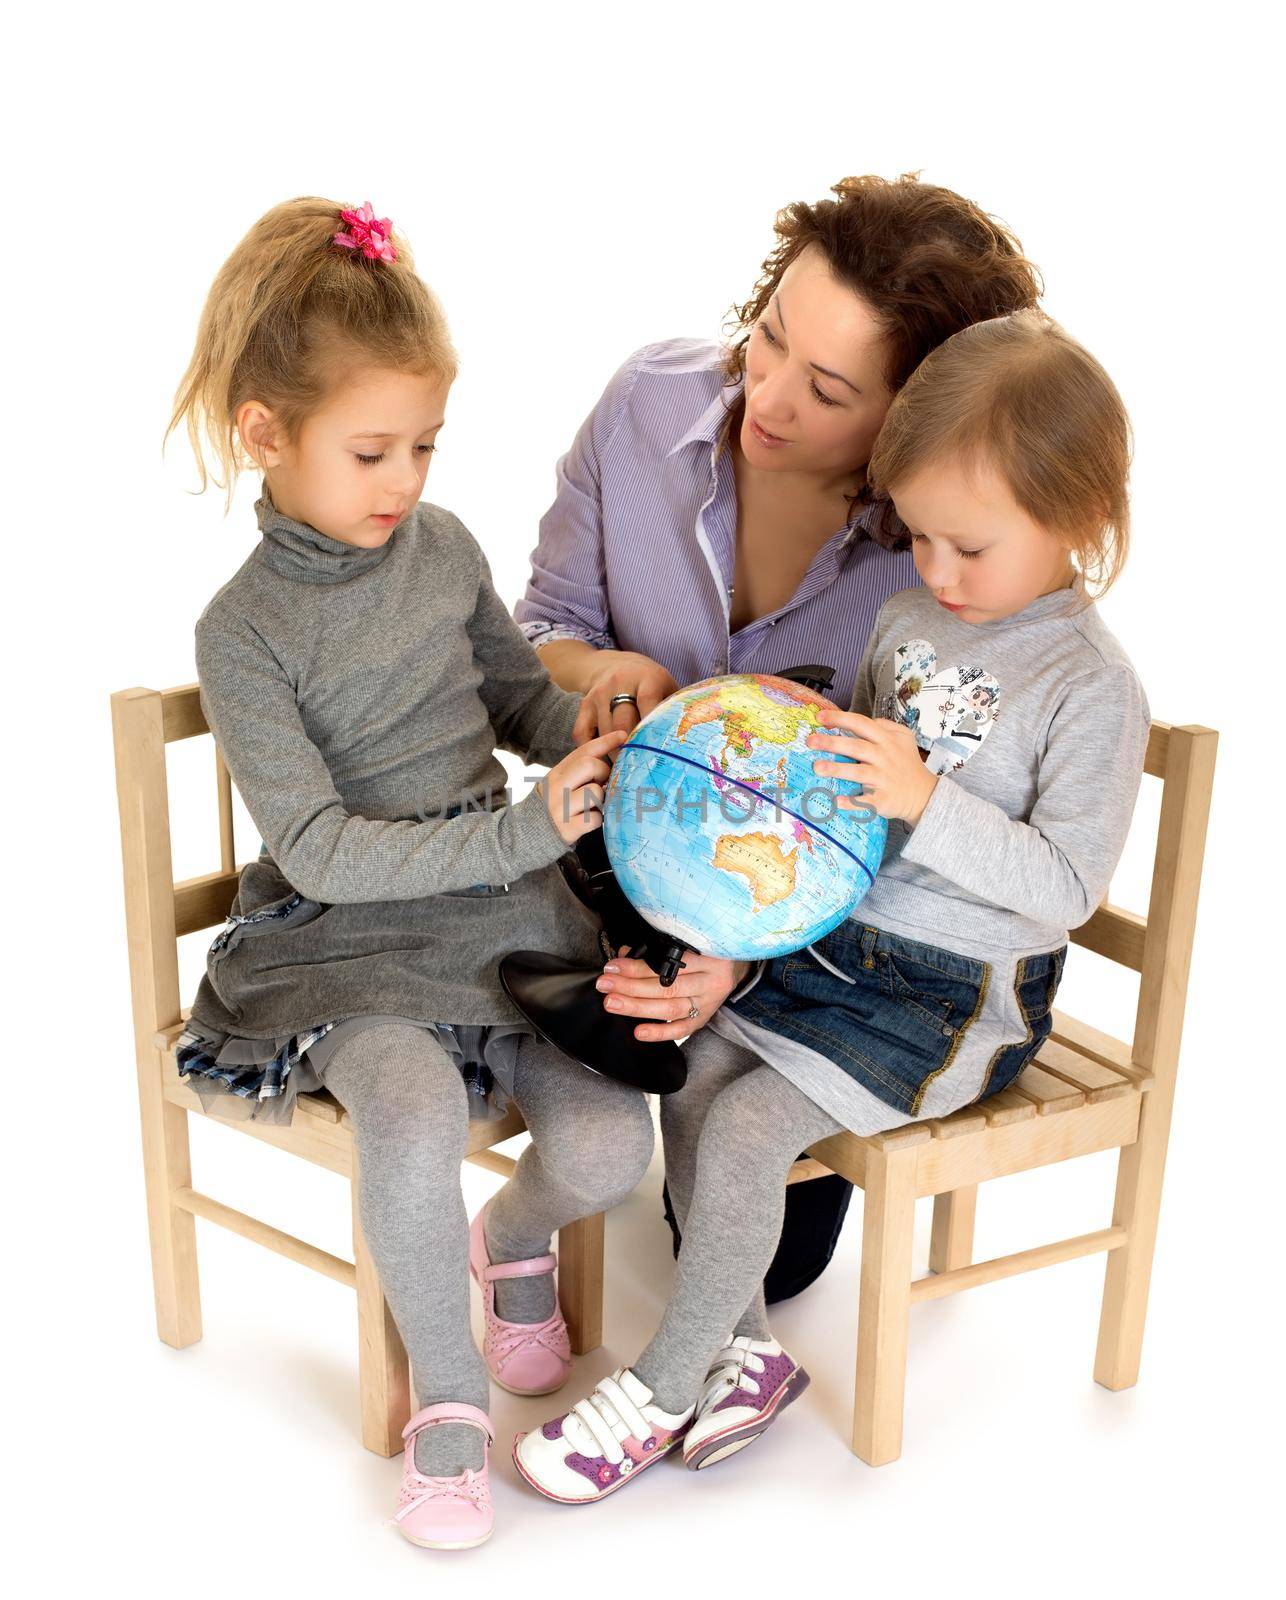 Young mother with her two daughters studying Globe - Isolated on white background